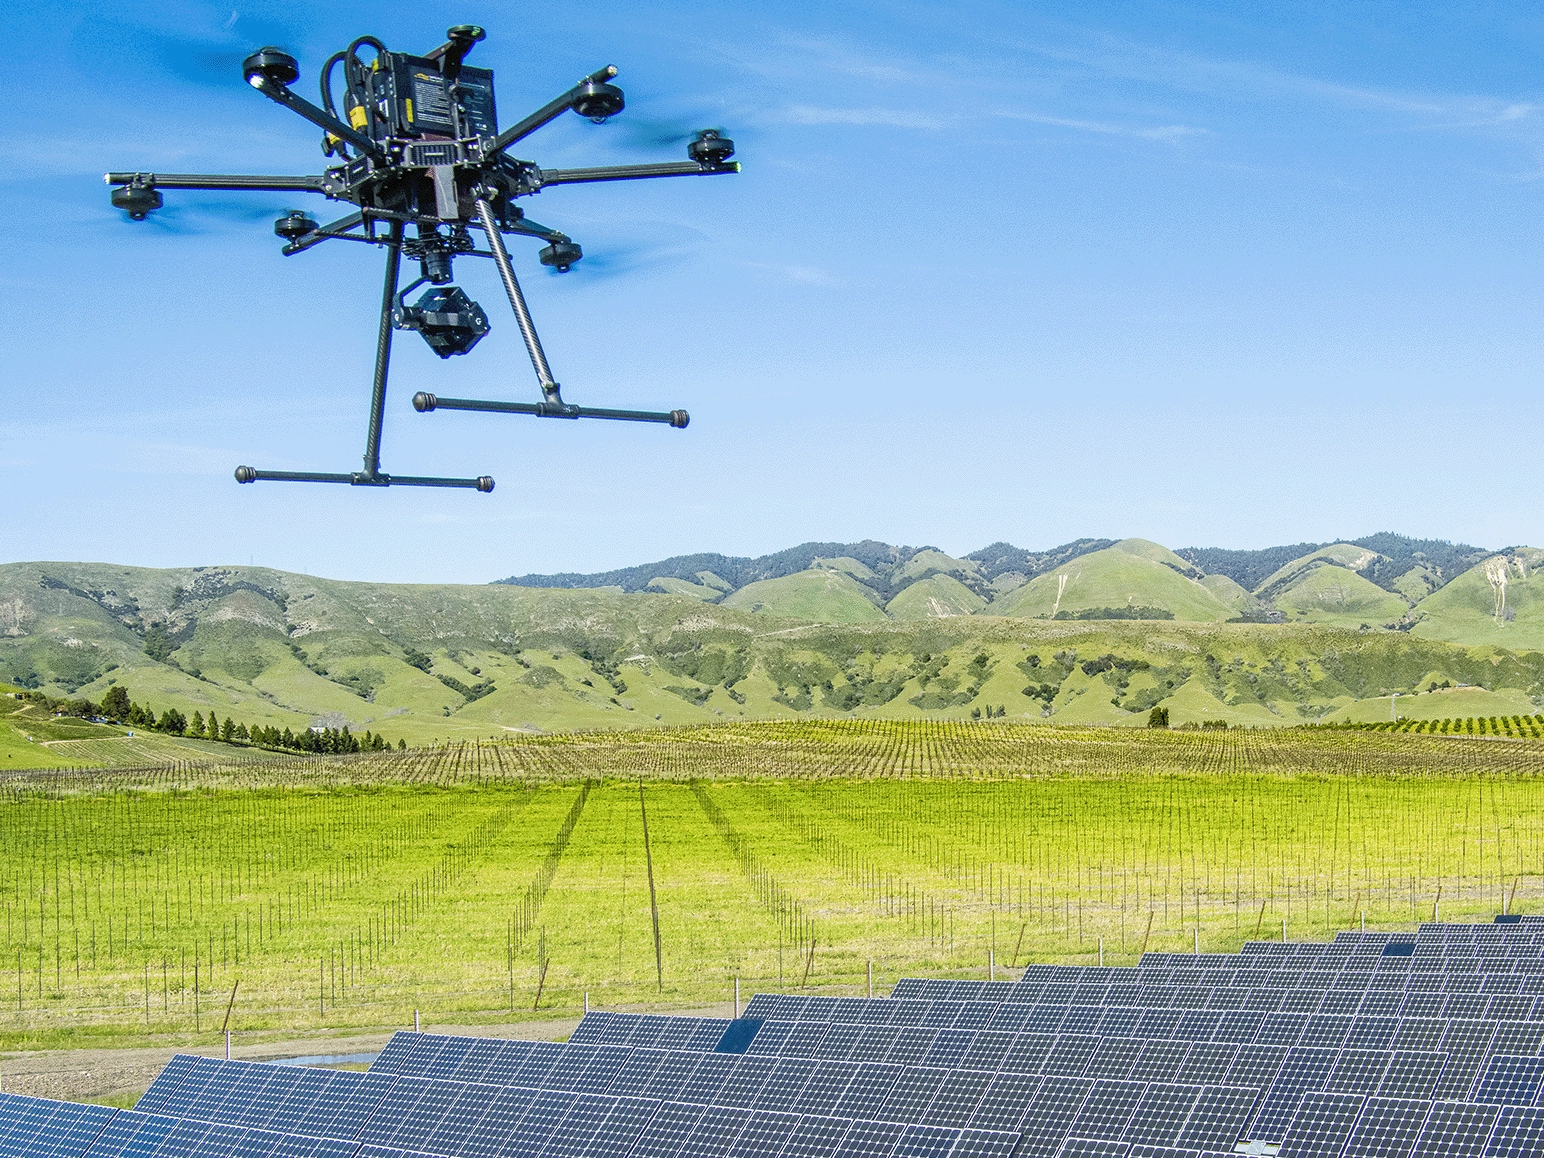 Inspired Flight IF1200A, heavy-lift drone, for Solar Inspection